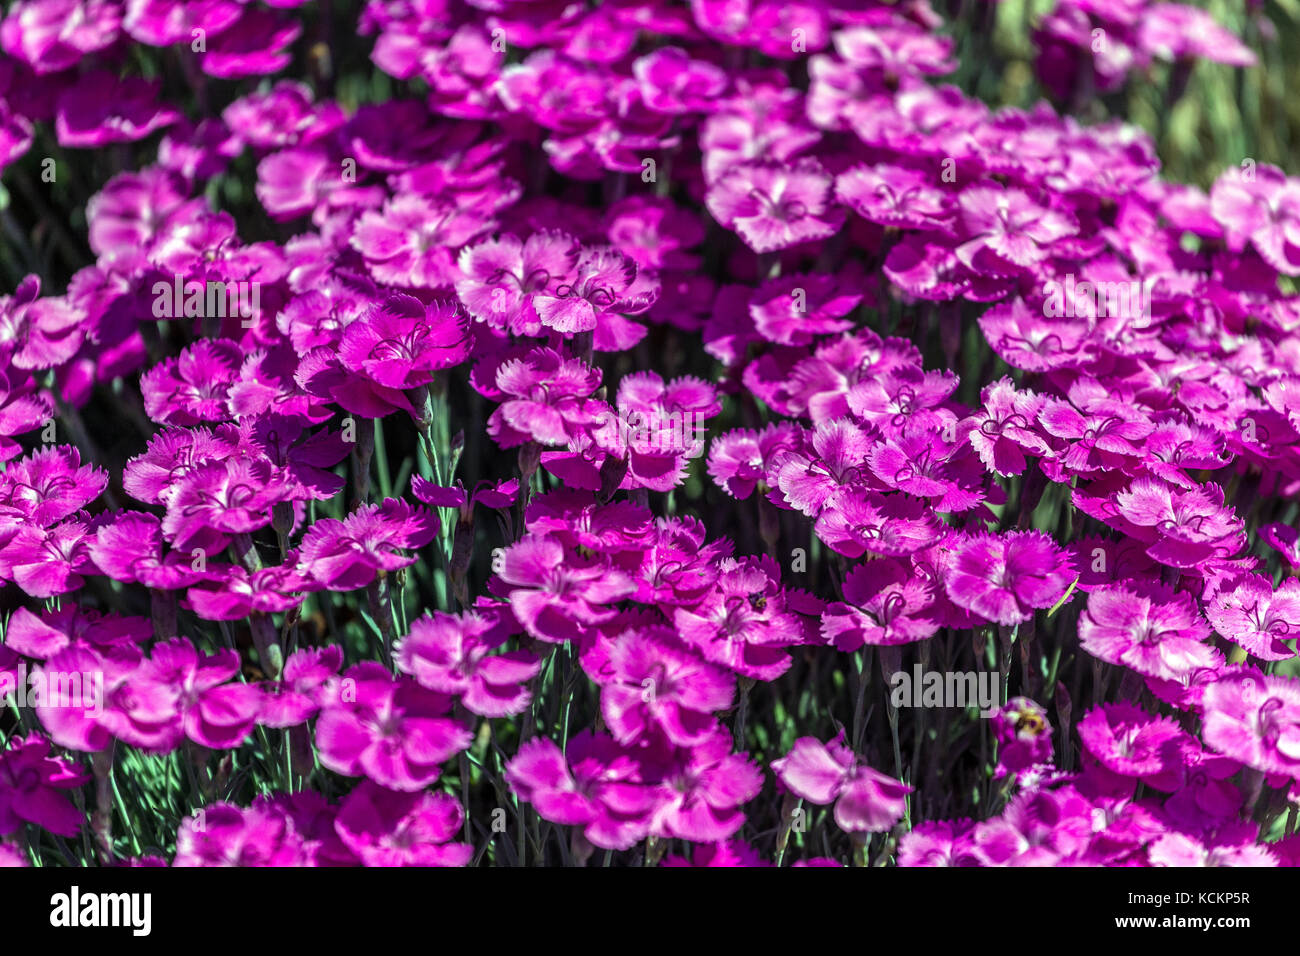 Deep Pink Cheddar Dianthus "Whatfield Magenta" Violet Purple Flowers Ground Cover Growing Blooms Flower Alpine Plant Rockery Garden Dry Place Foto Stock